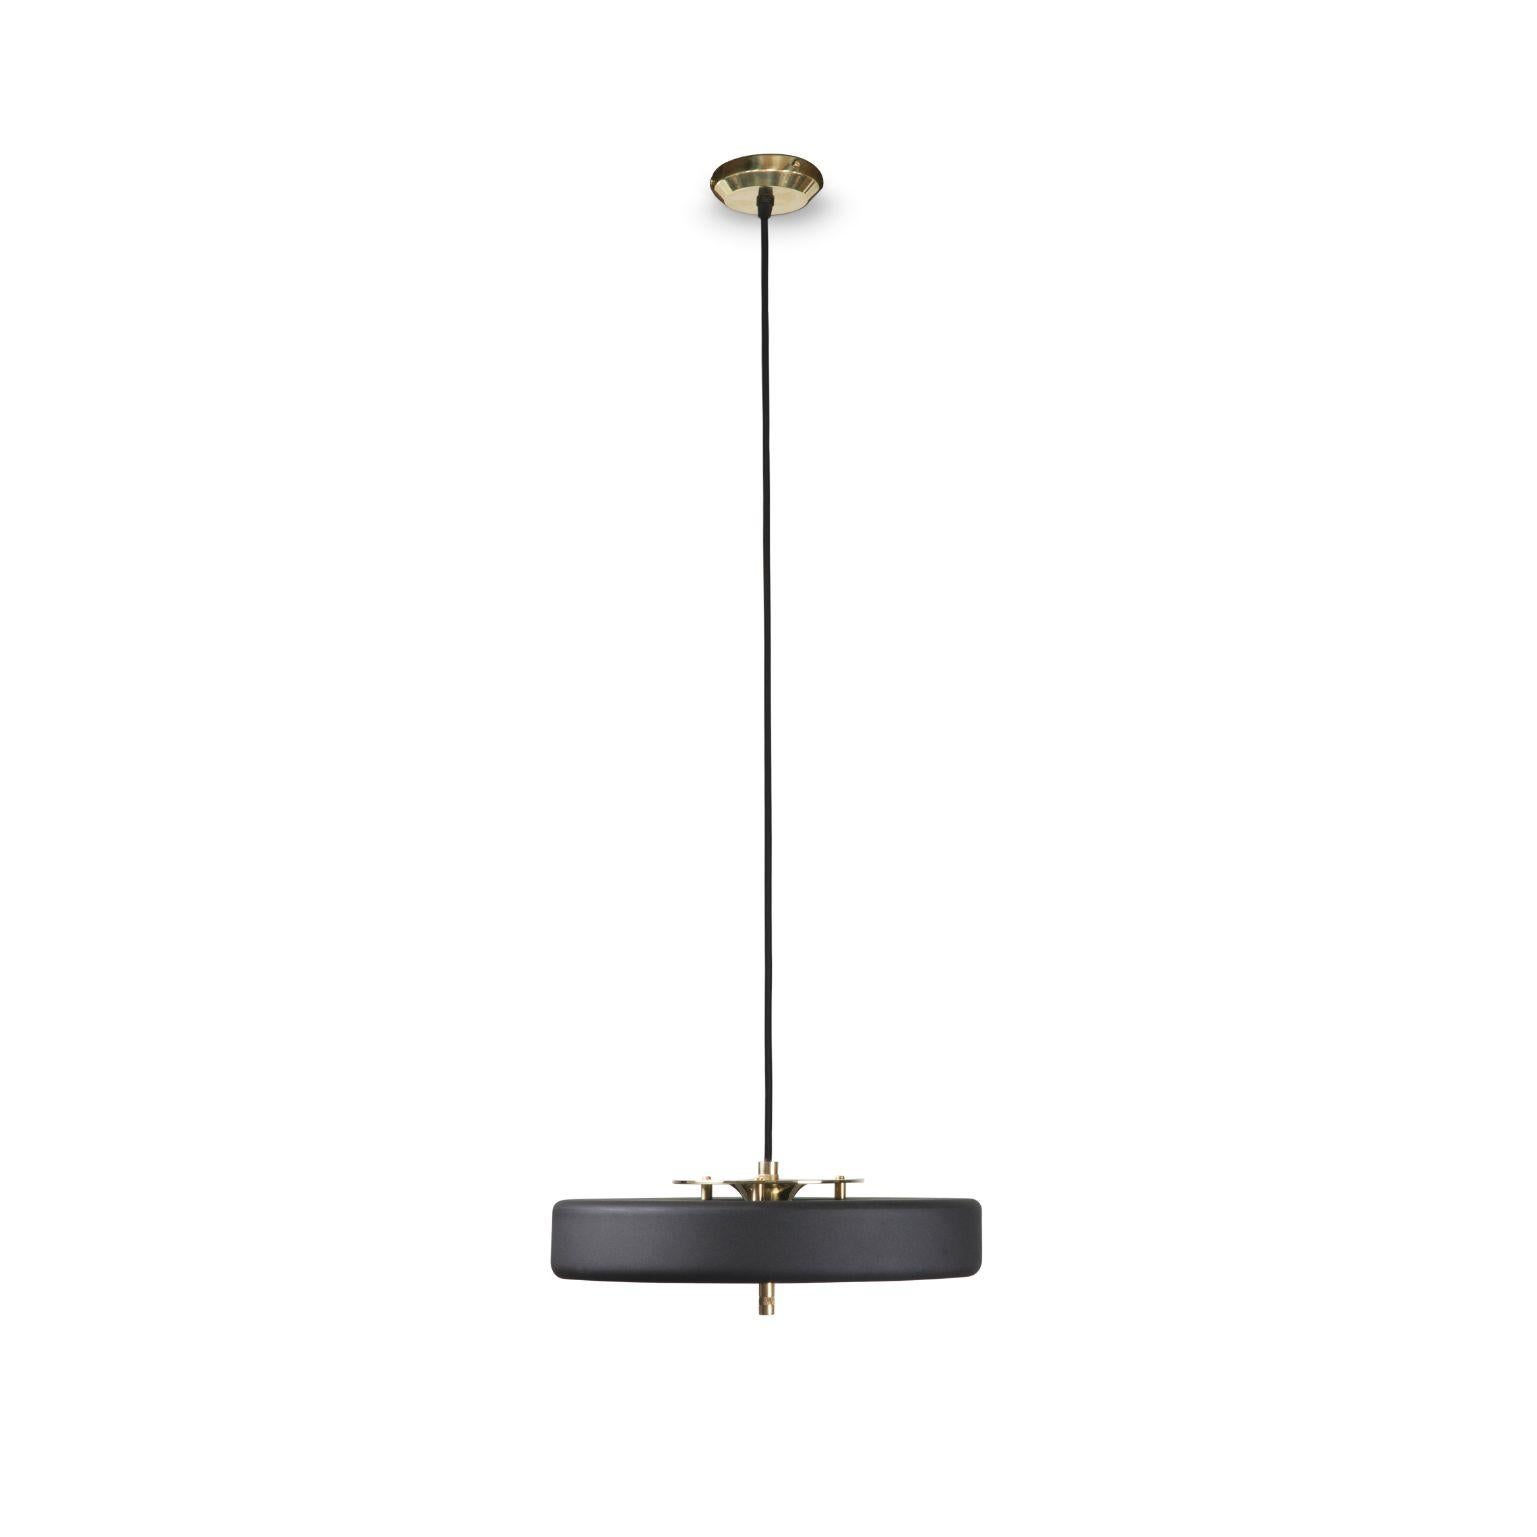 Revolve pendant light - brushed brass - black by Bert Frank
Dimensions: 60-200 x 35 x 11 cm
Materials: Brass, steel

When Adam Yeats and Robbie Llewellyn founded Bert Frank in 2013 it was a meeting of minds and the start of a collaborative creative